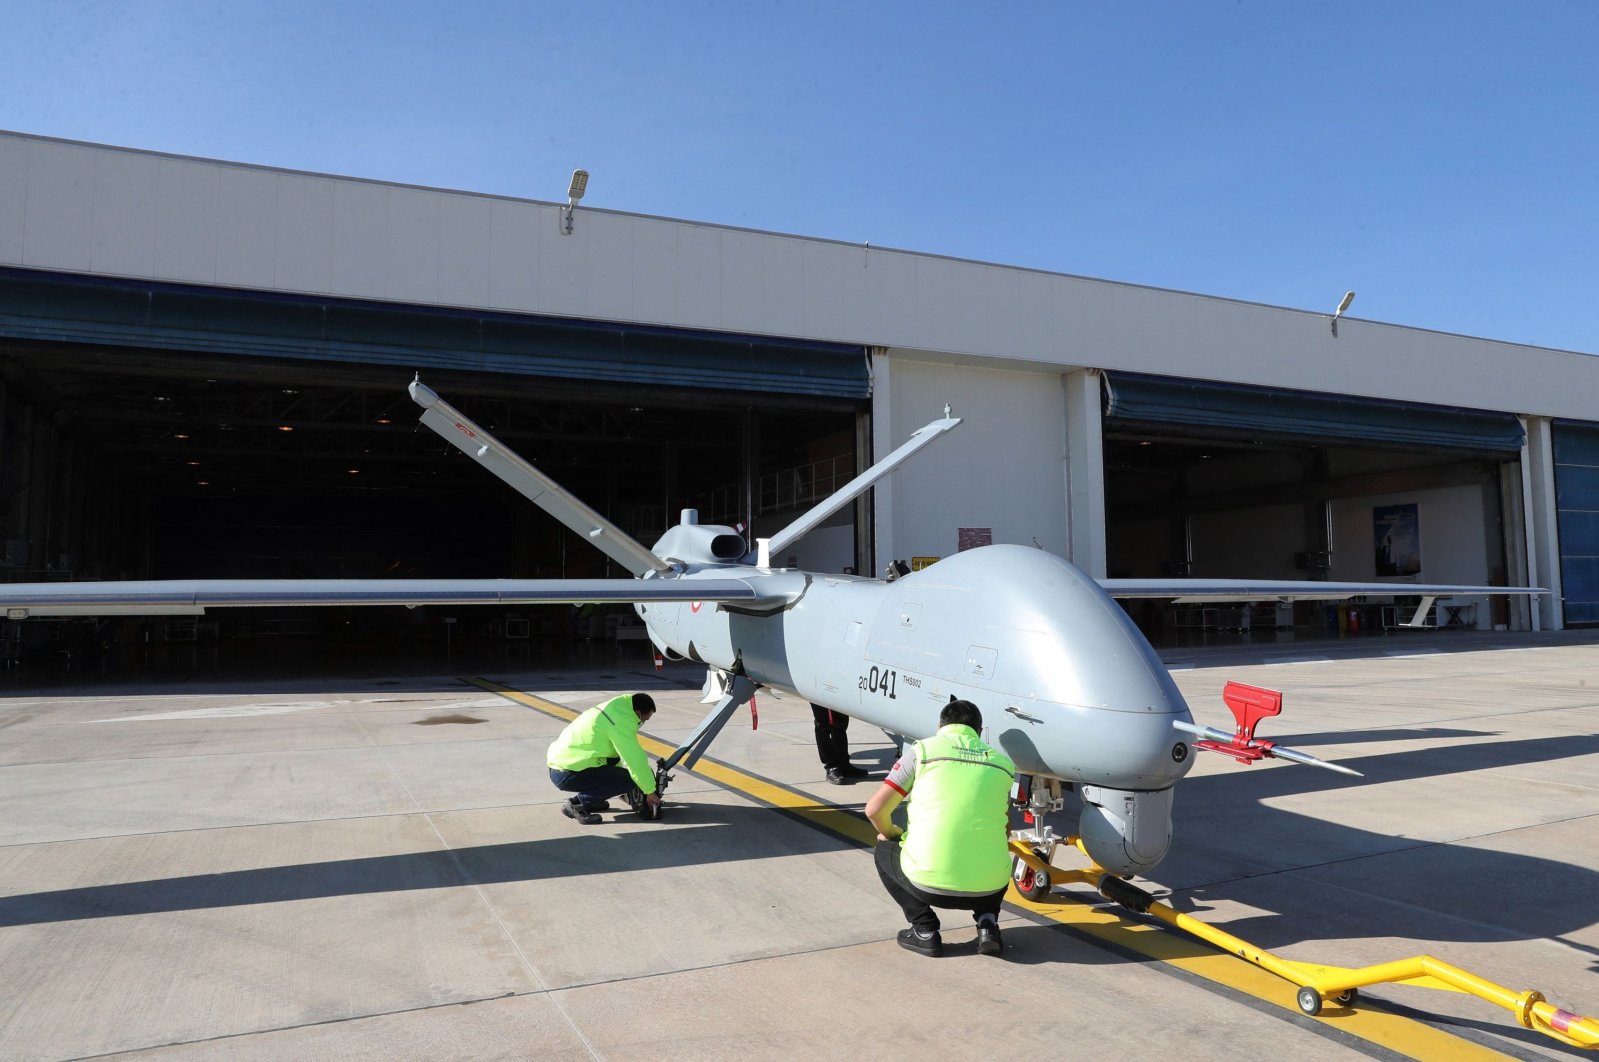 The Anka drone is checked by employees in Ankara, Turkey, March 5, 2021. (AFP Photo)